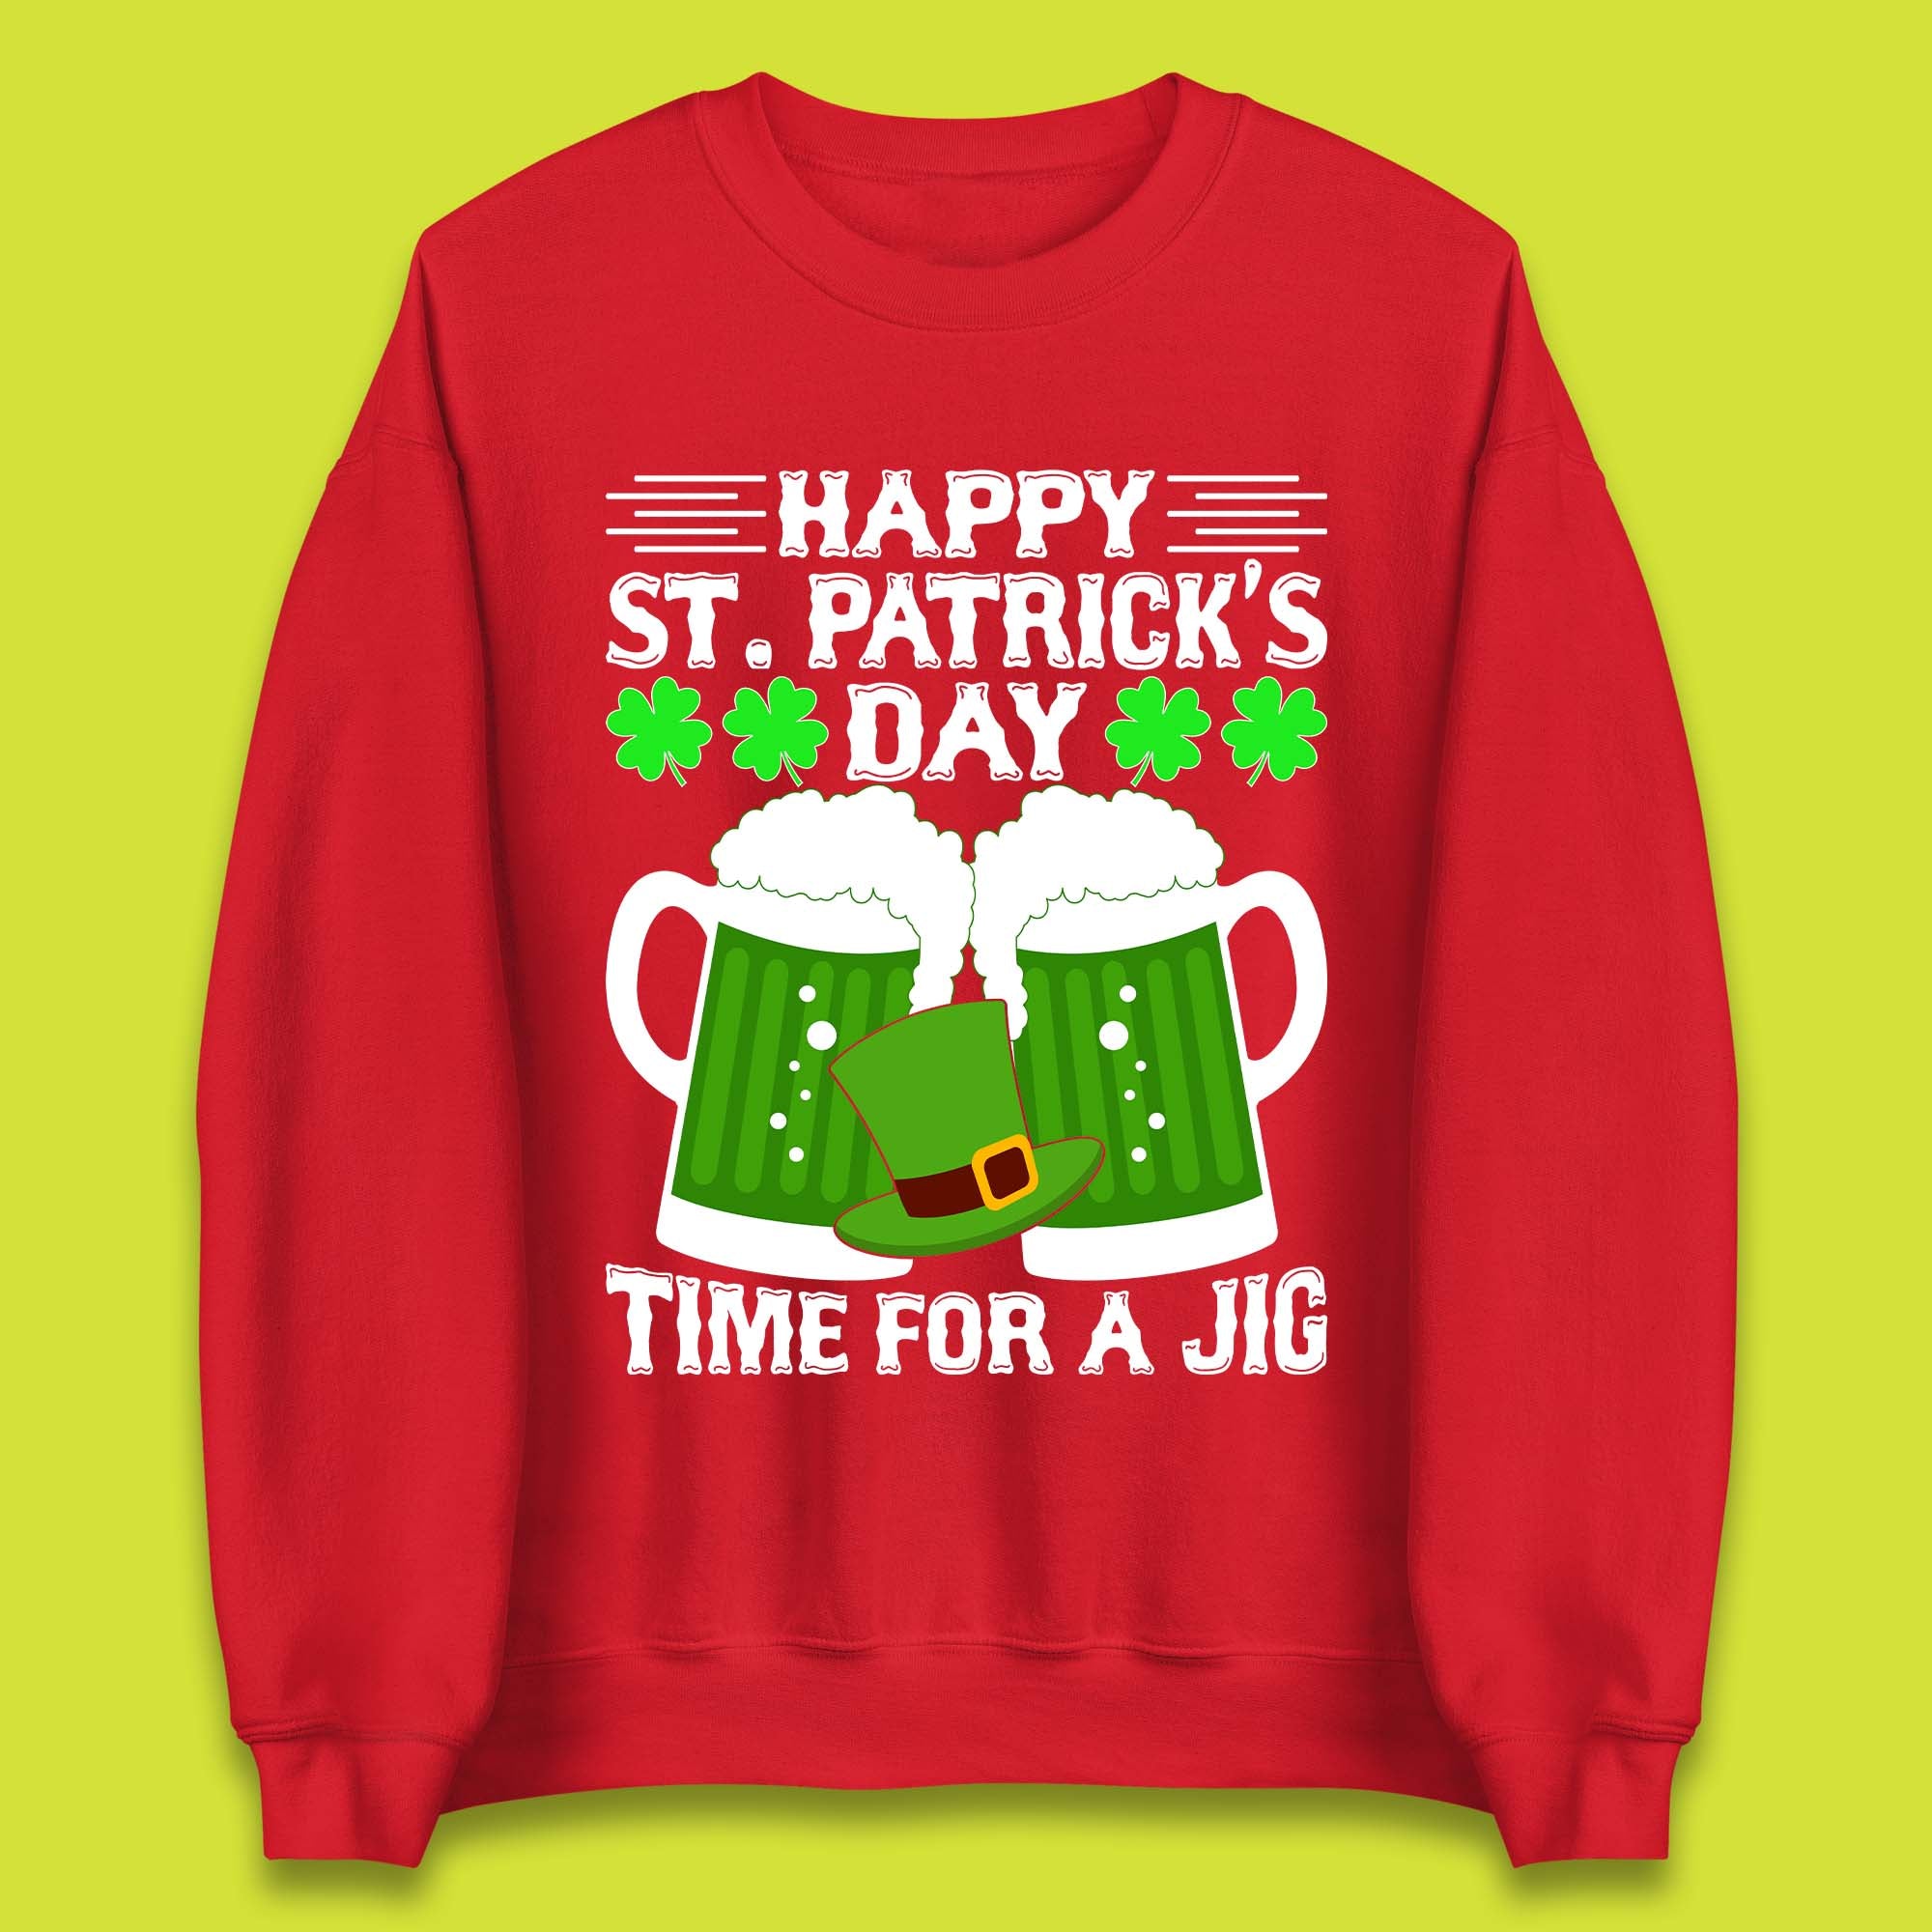 St. Patrick's Day Time For A Jig Unisex Sweatshirt